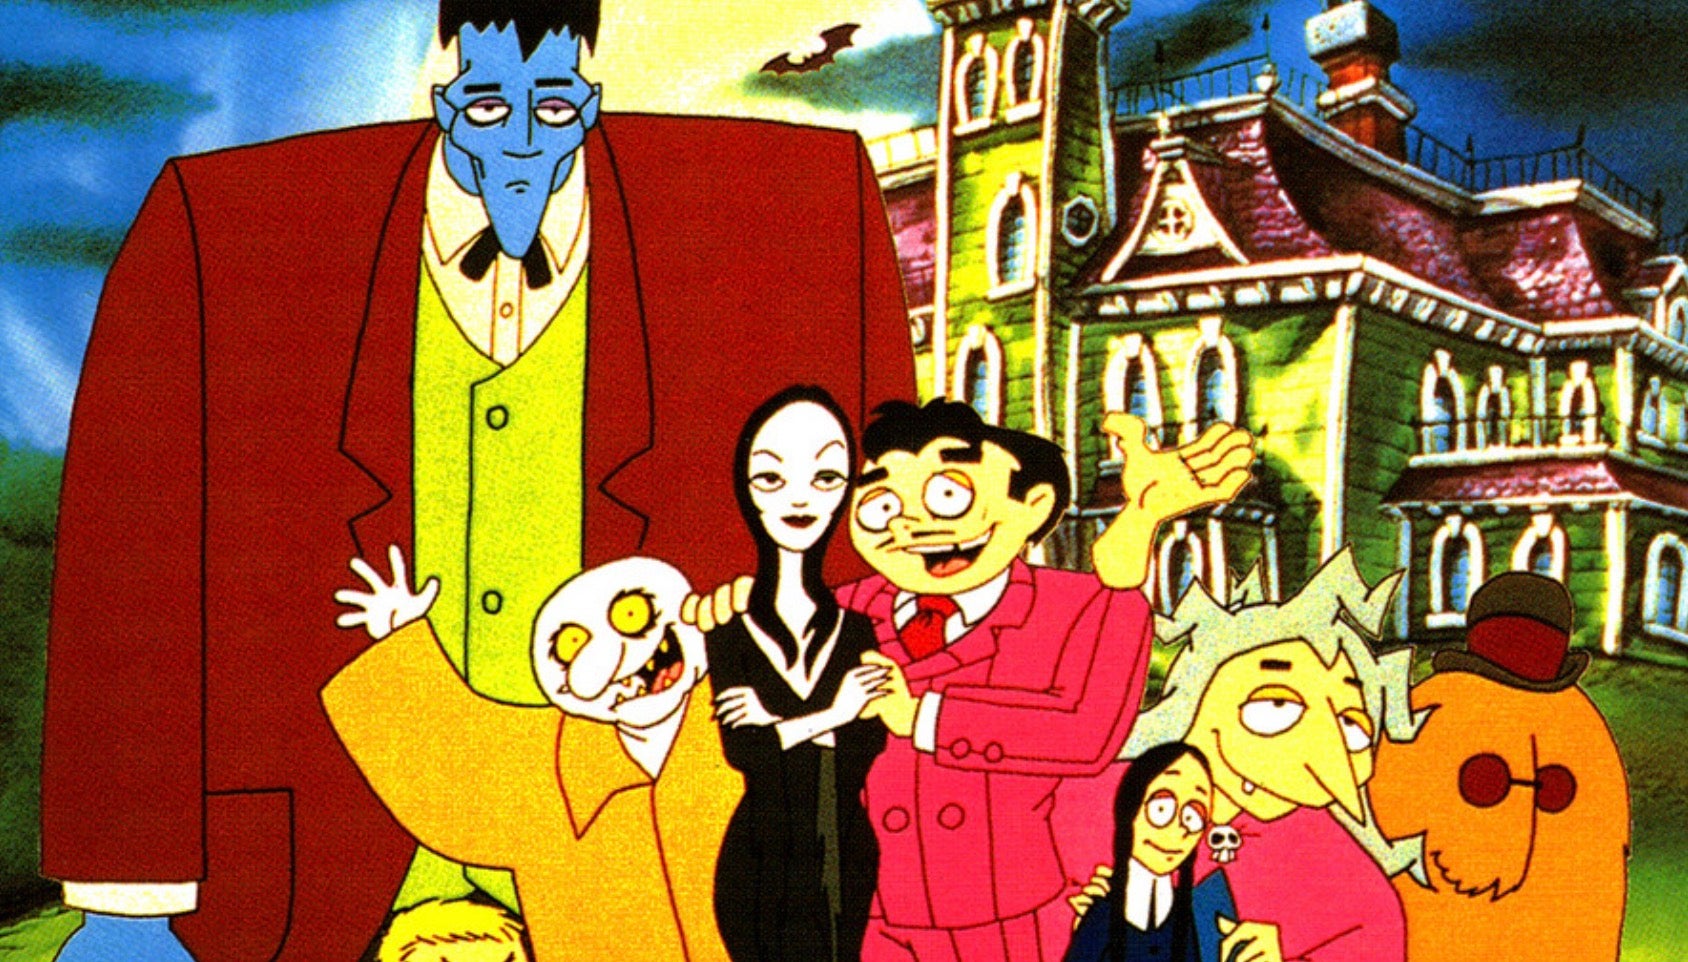 download addams family animated 2